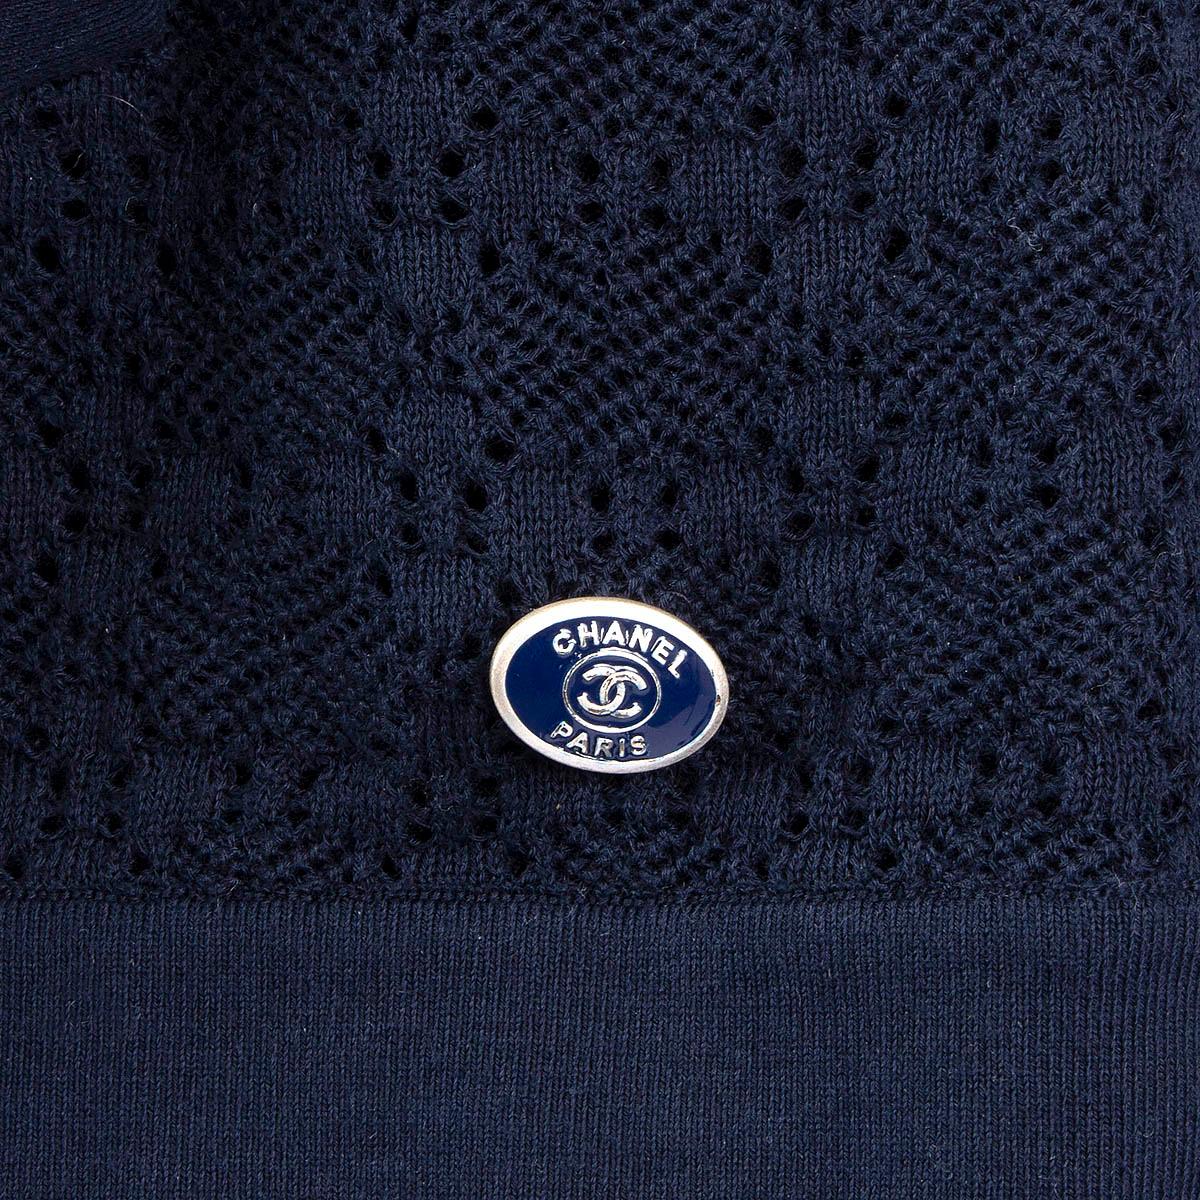 CHANEL navy blue cotton 2016 PEARL STUDDED KNIT Shirt 40 M For Sale 3